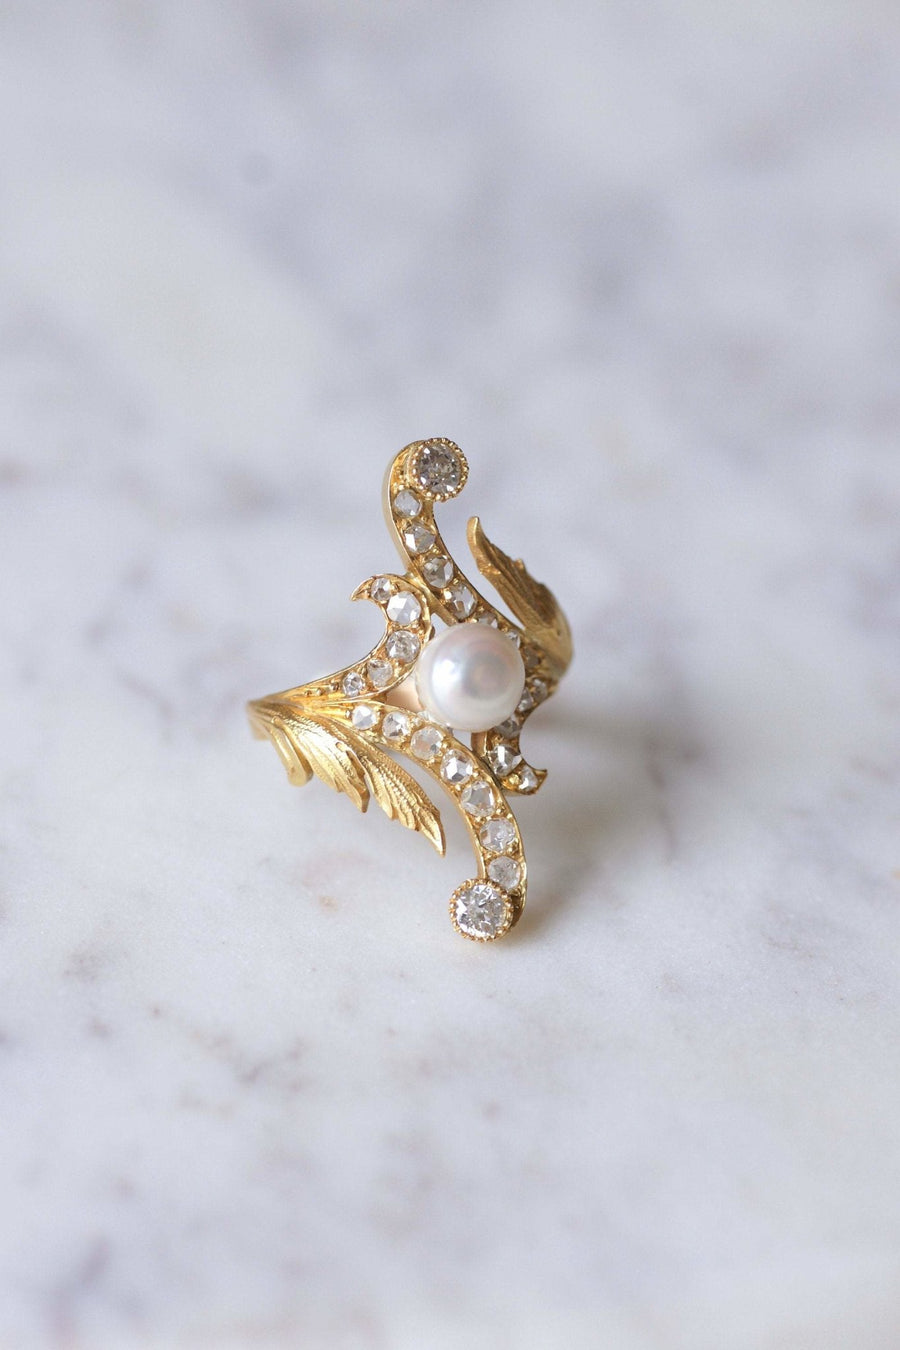 Marquise Art Nouveau style ring in 14Kt gold, diamonds, pearl - Galerie Pénélope